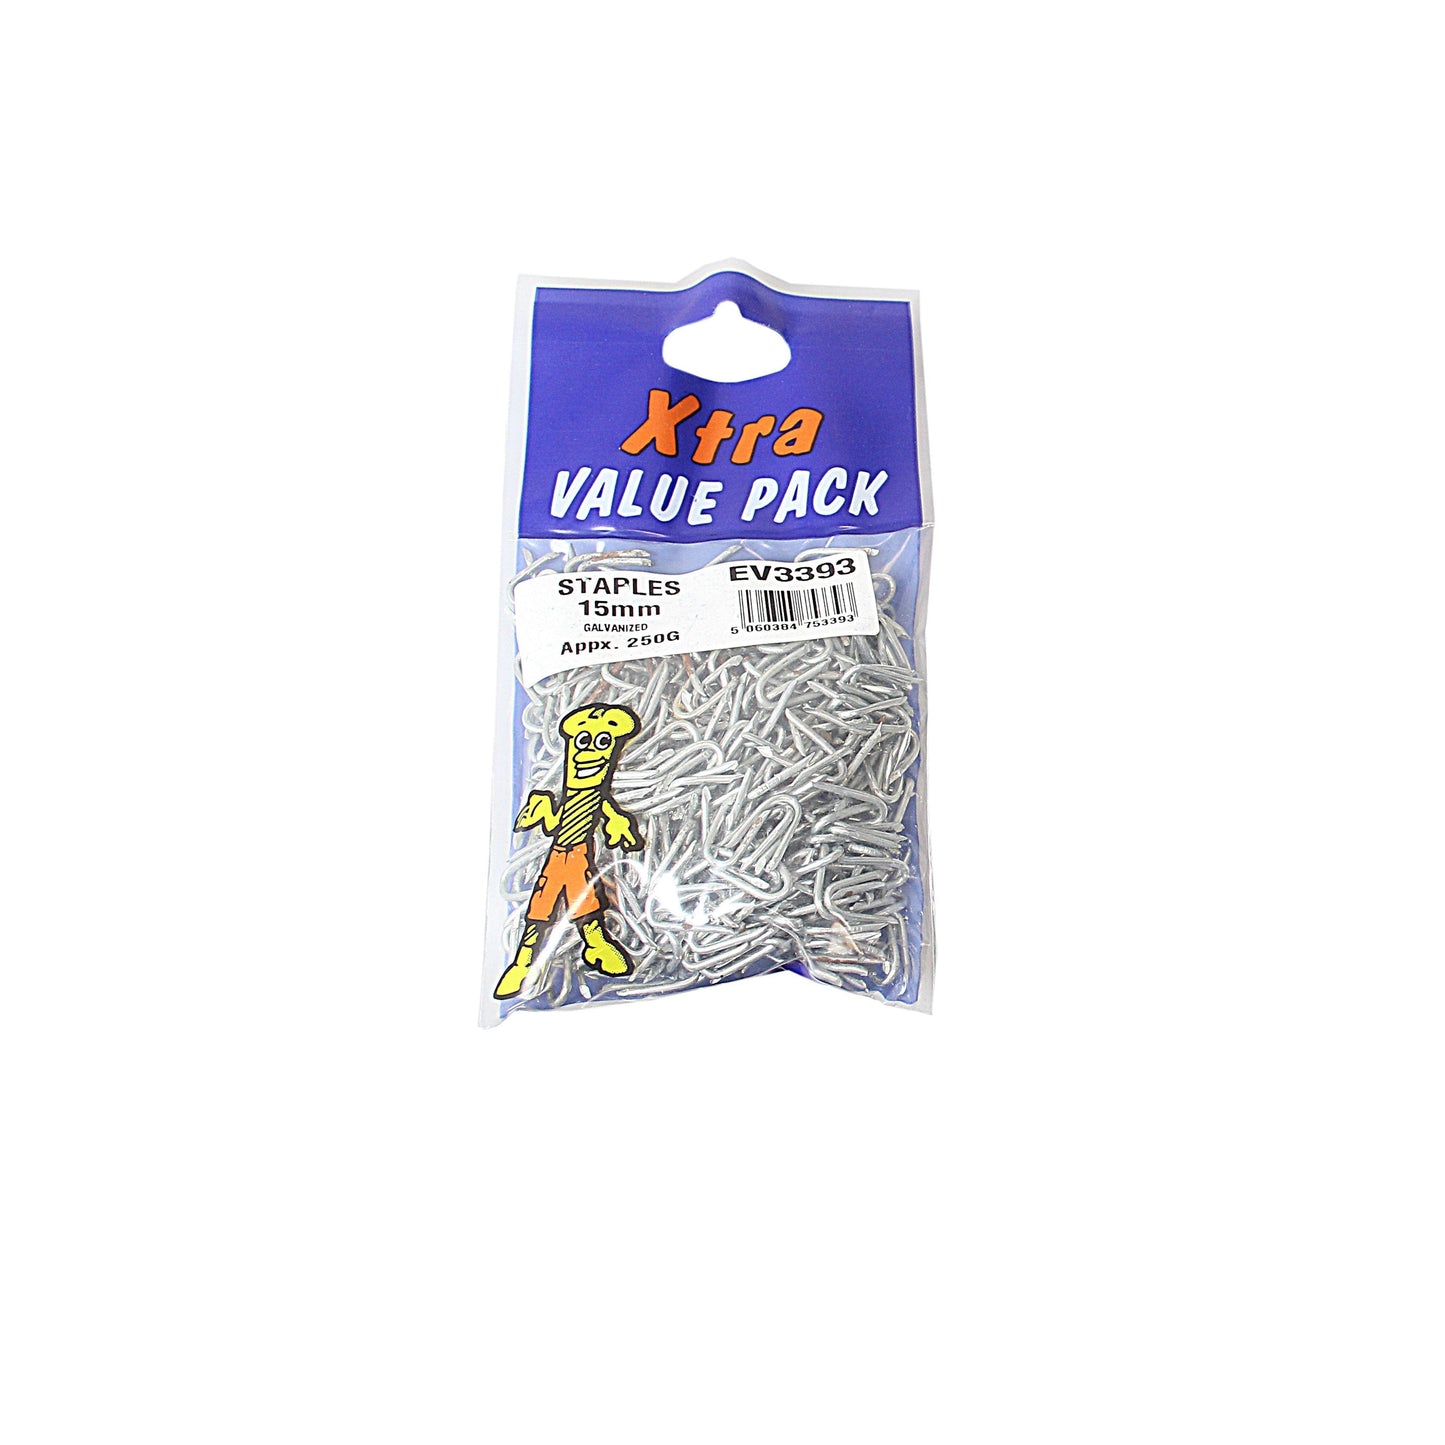 15mm Galvanised Staples Xtra Value Diy 53399 (Large Letter Rate)